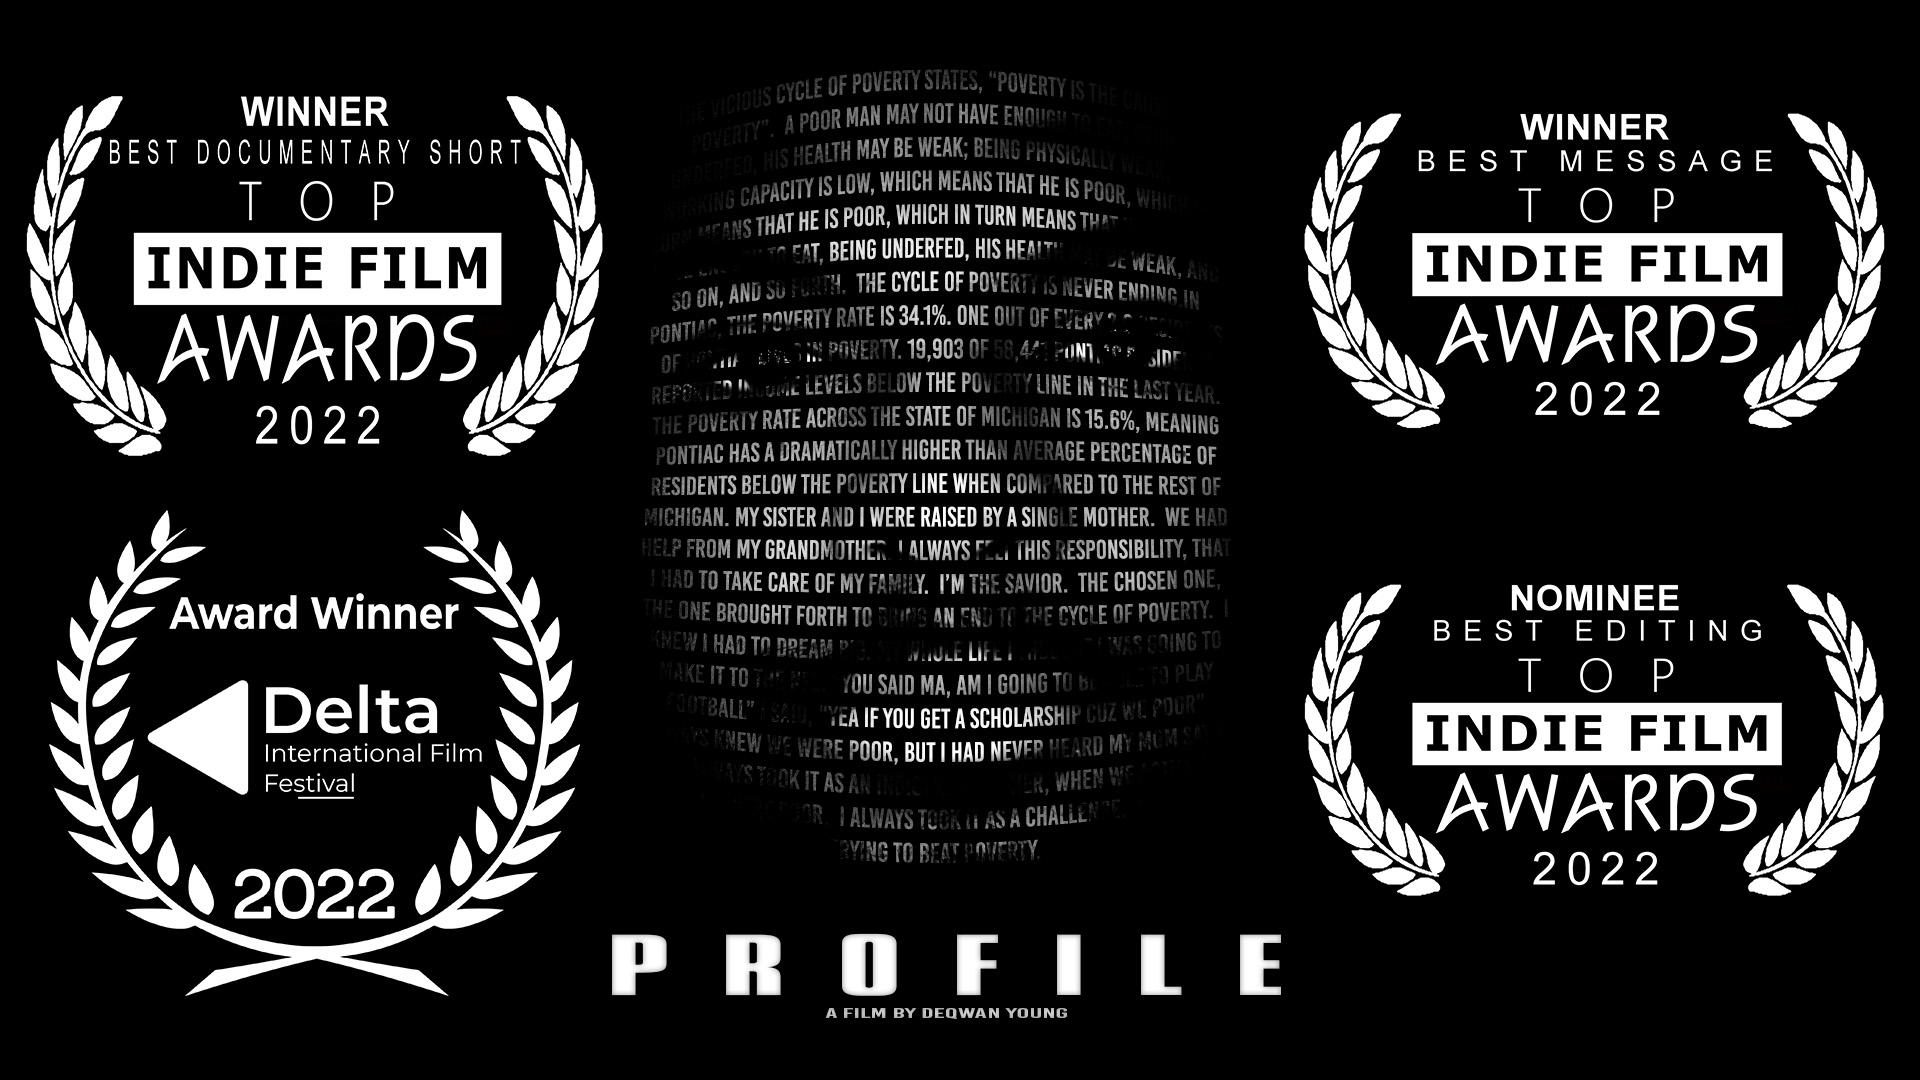 Profile – A Film by DeQwan Young